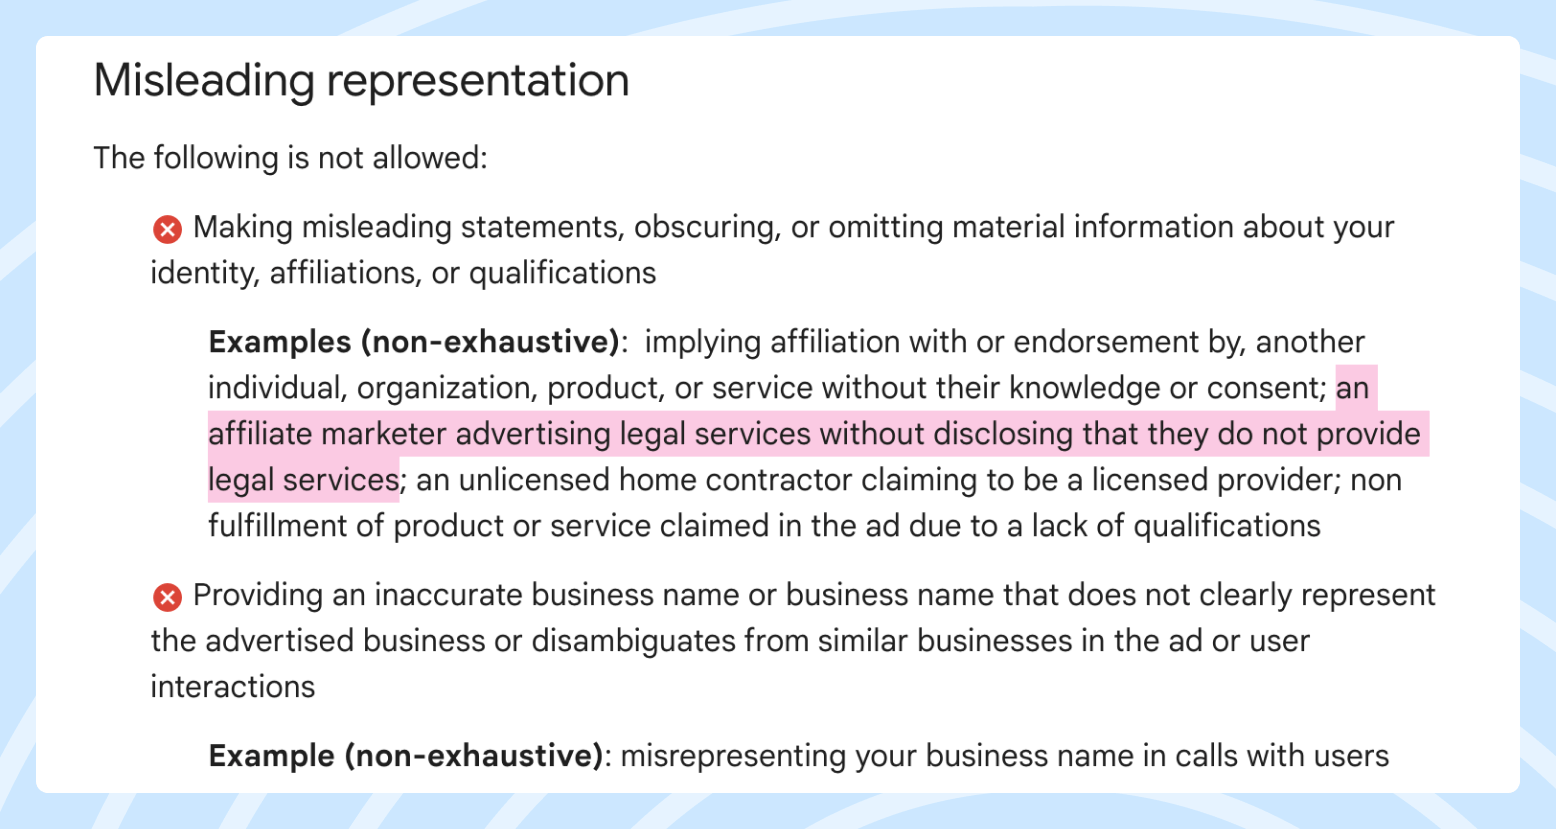 Screenshot of the excerpt from Google Ads Policies, showing text about misleading representation.